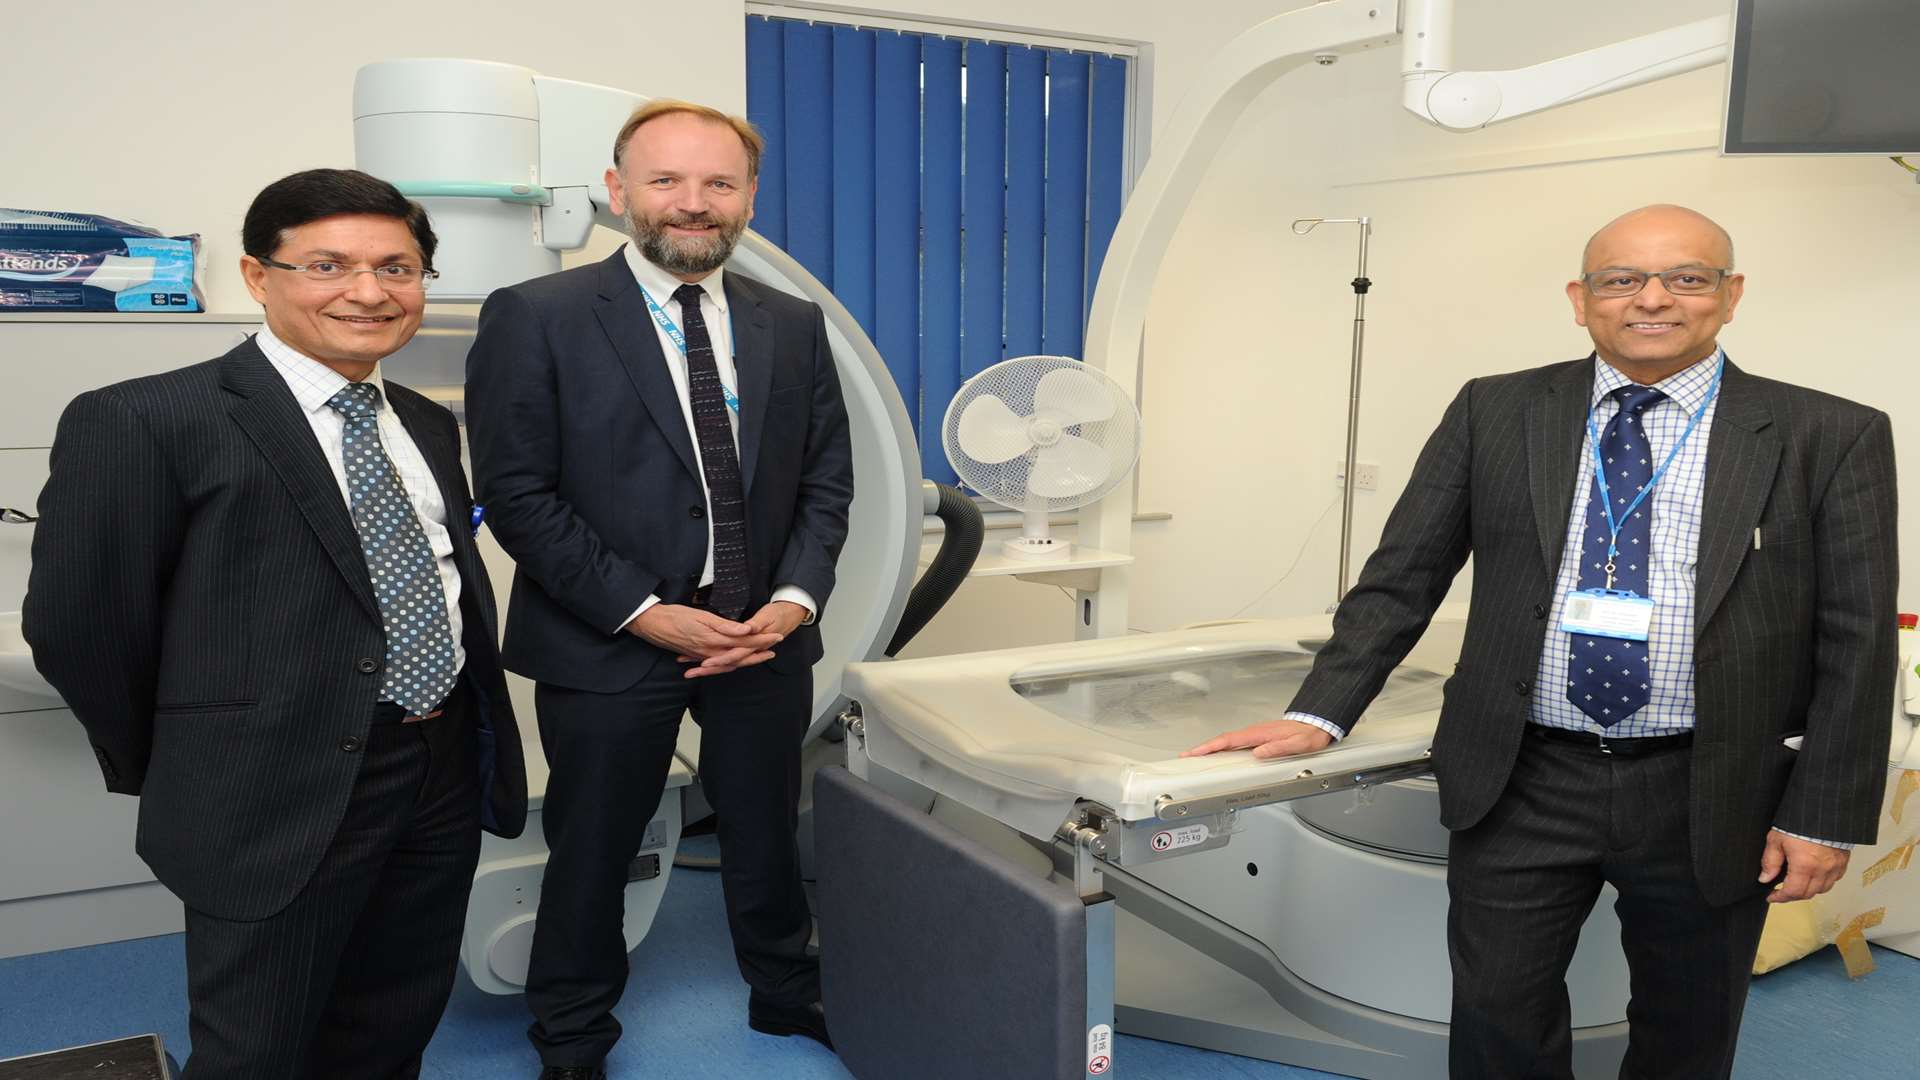 Darent Valley Hospital, Dartford. Head of NHS England Simon Stevens with Prof Sri Sripasad and Prof Sanjeev Madaan next to the Lithotripter.